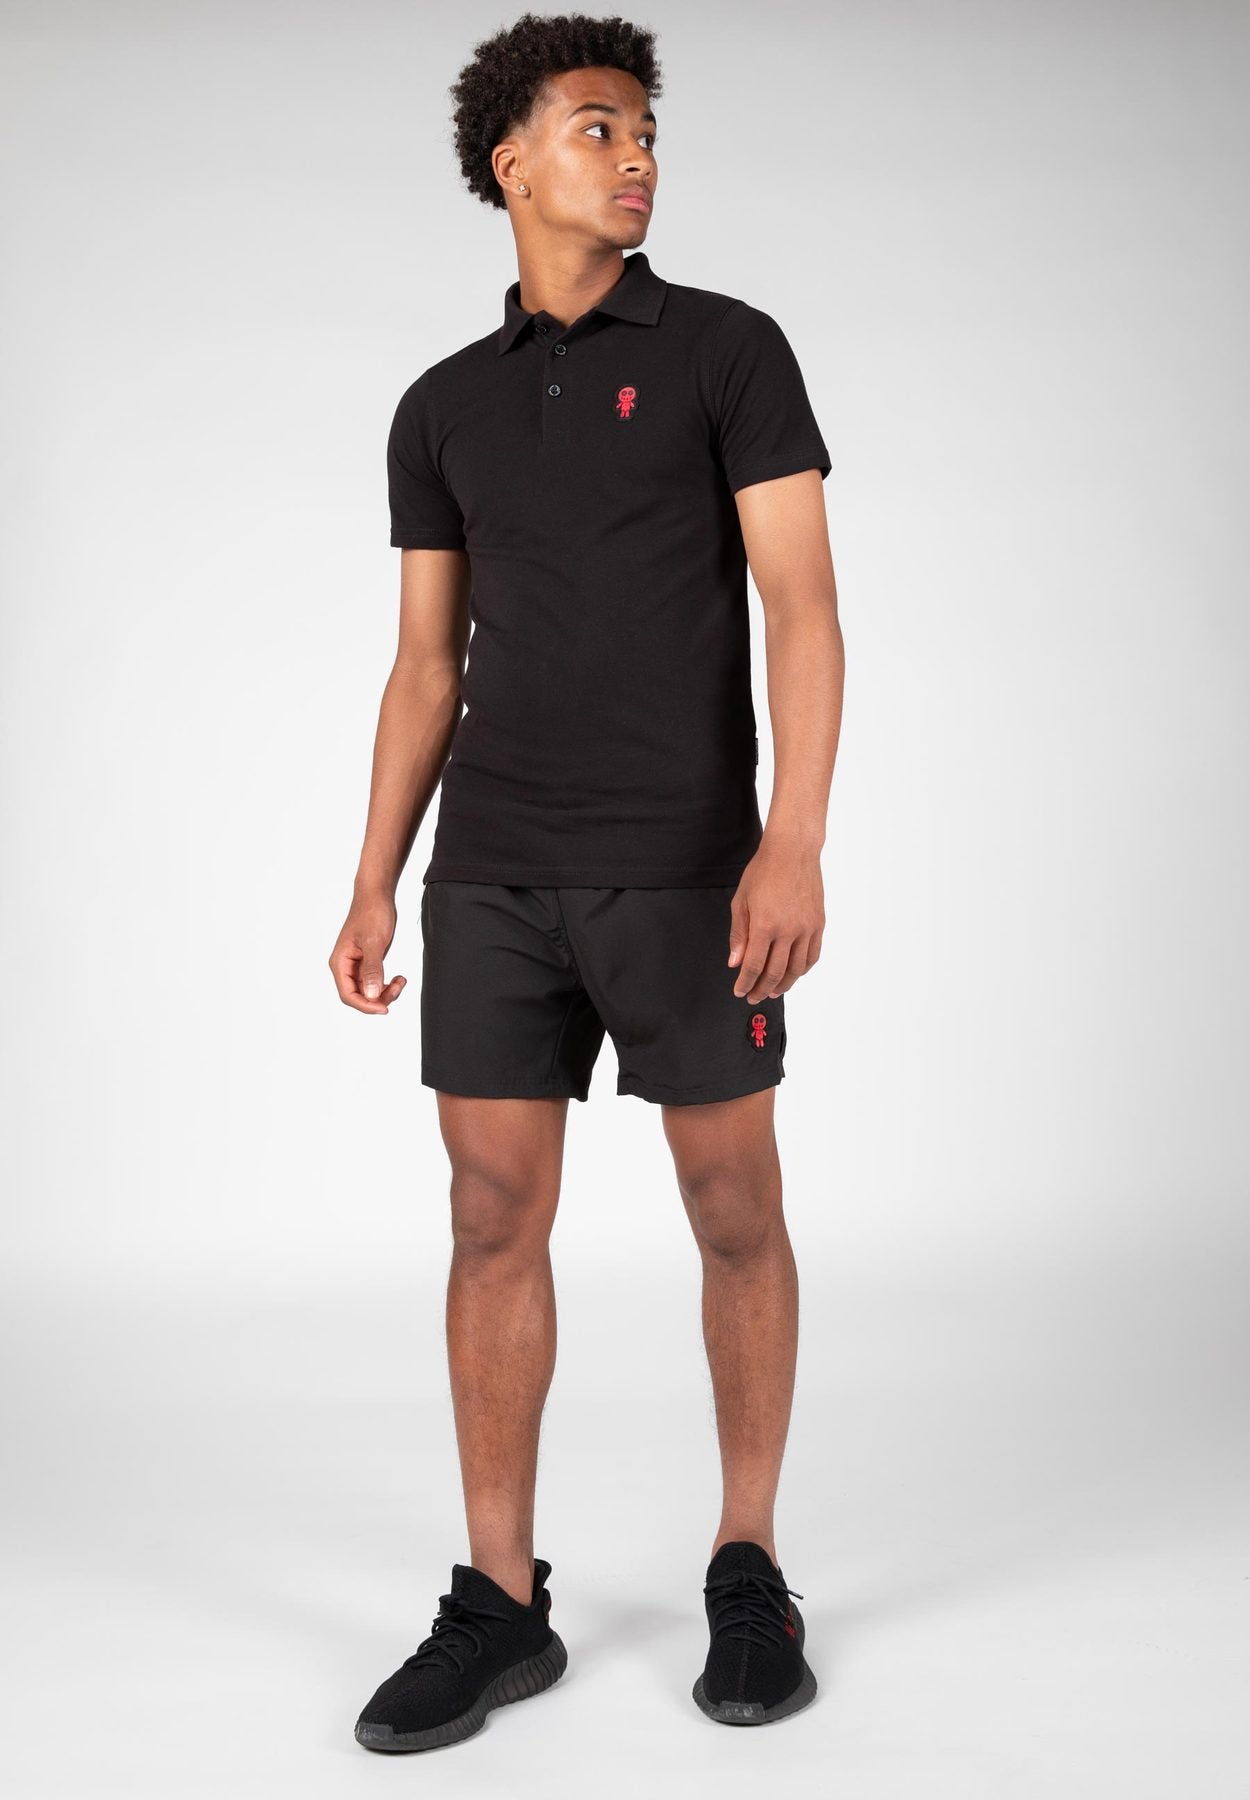 VOODOO POLO T-SHIRT - BLACK/RED